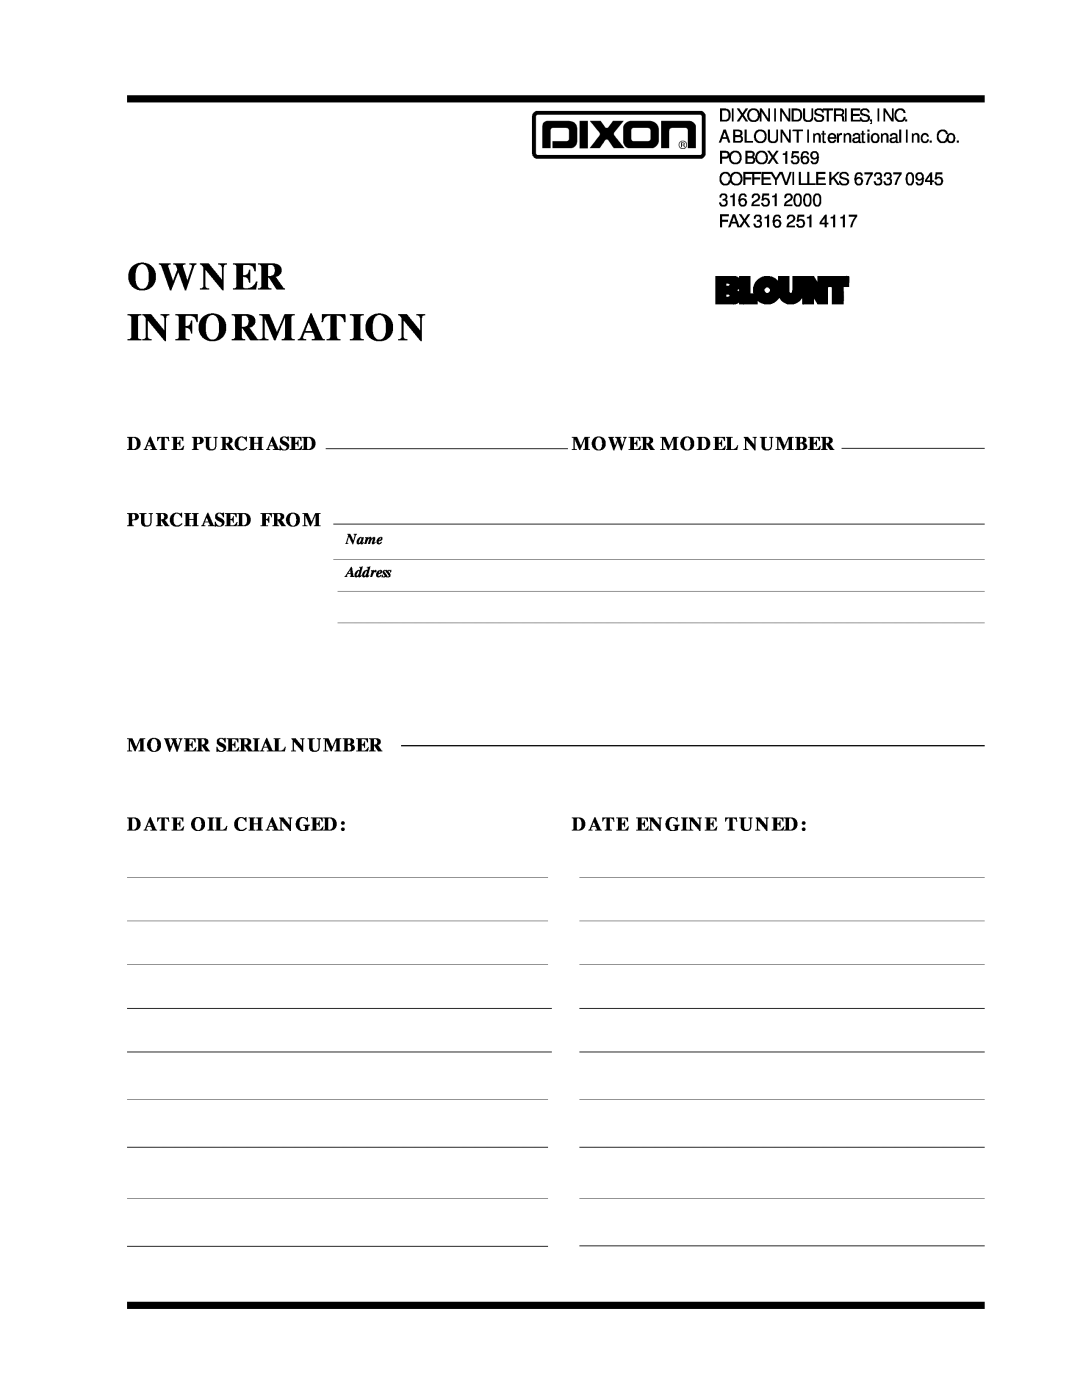 Dixon ZTR 5017Twin manual Owner Information, Dixon Industries, Inc, Fax, Page, Name Address 